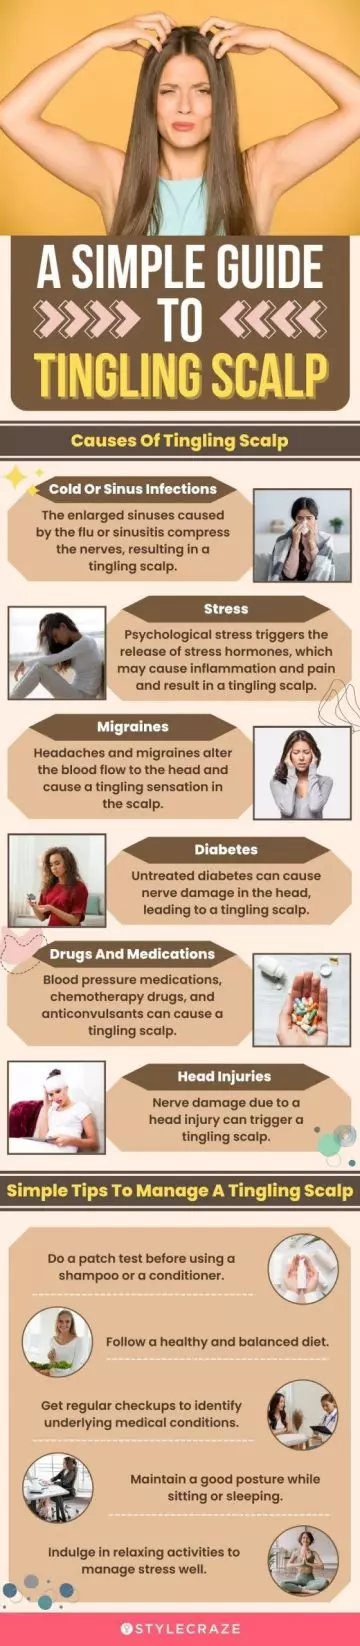 a simple guide to tingling scalp (infographic)